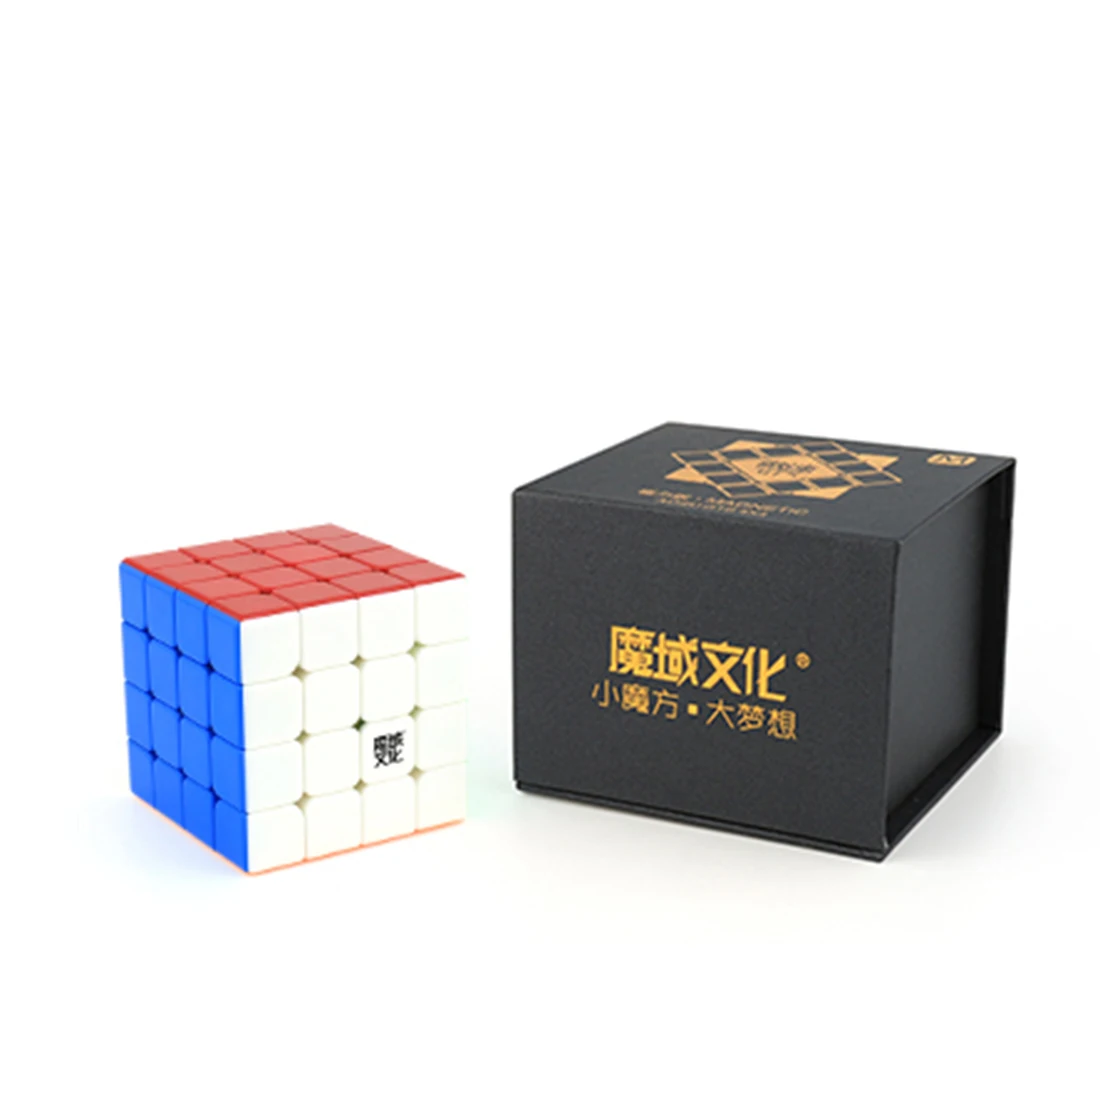 

YJ Aosu GTS M 4x4x4 Magic Cube Magnetic Version Speedcubing Puzzle Toy for Competition - Black